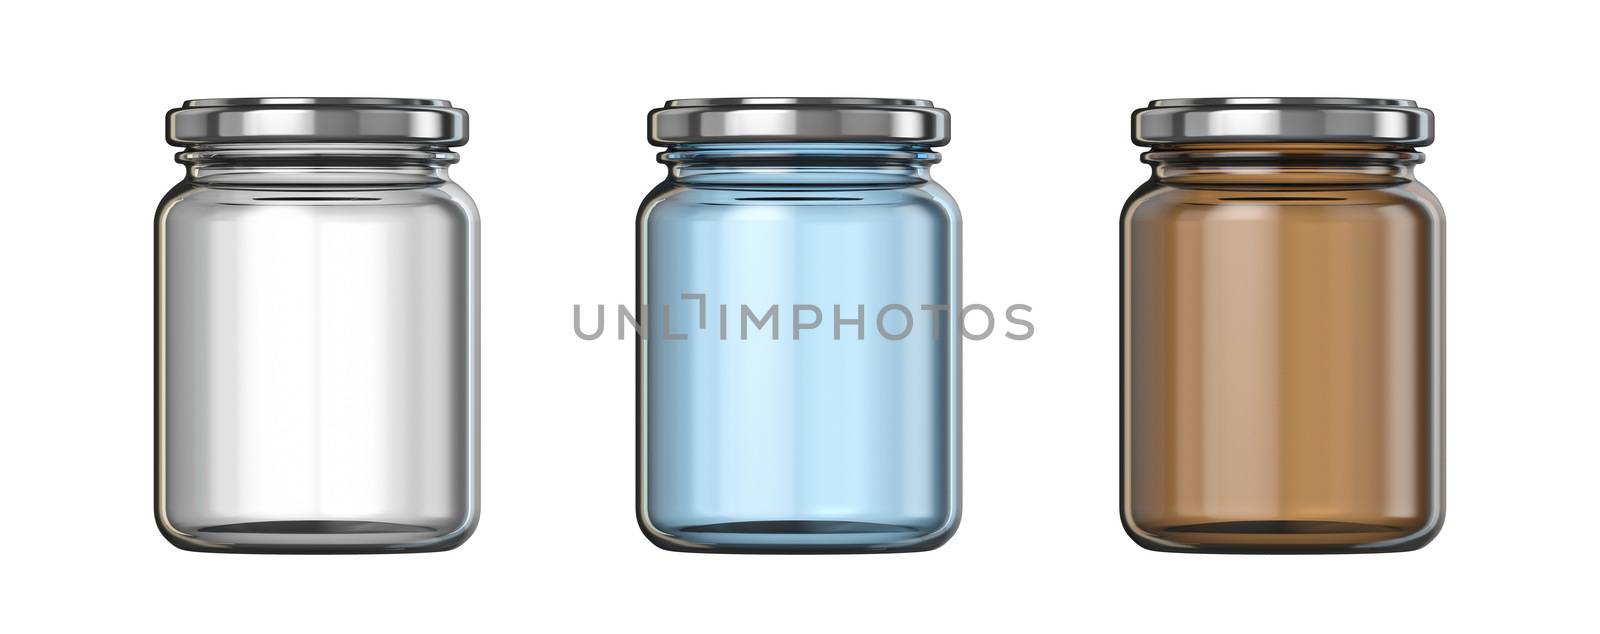 White, blue and brown big glass jars template 3D render illustration isolated on white background